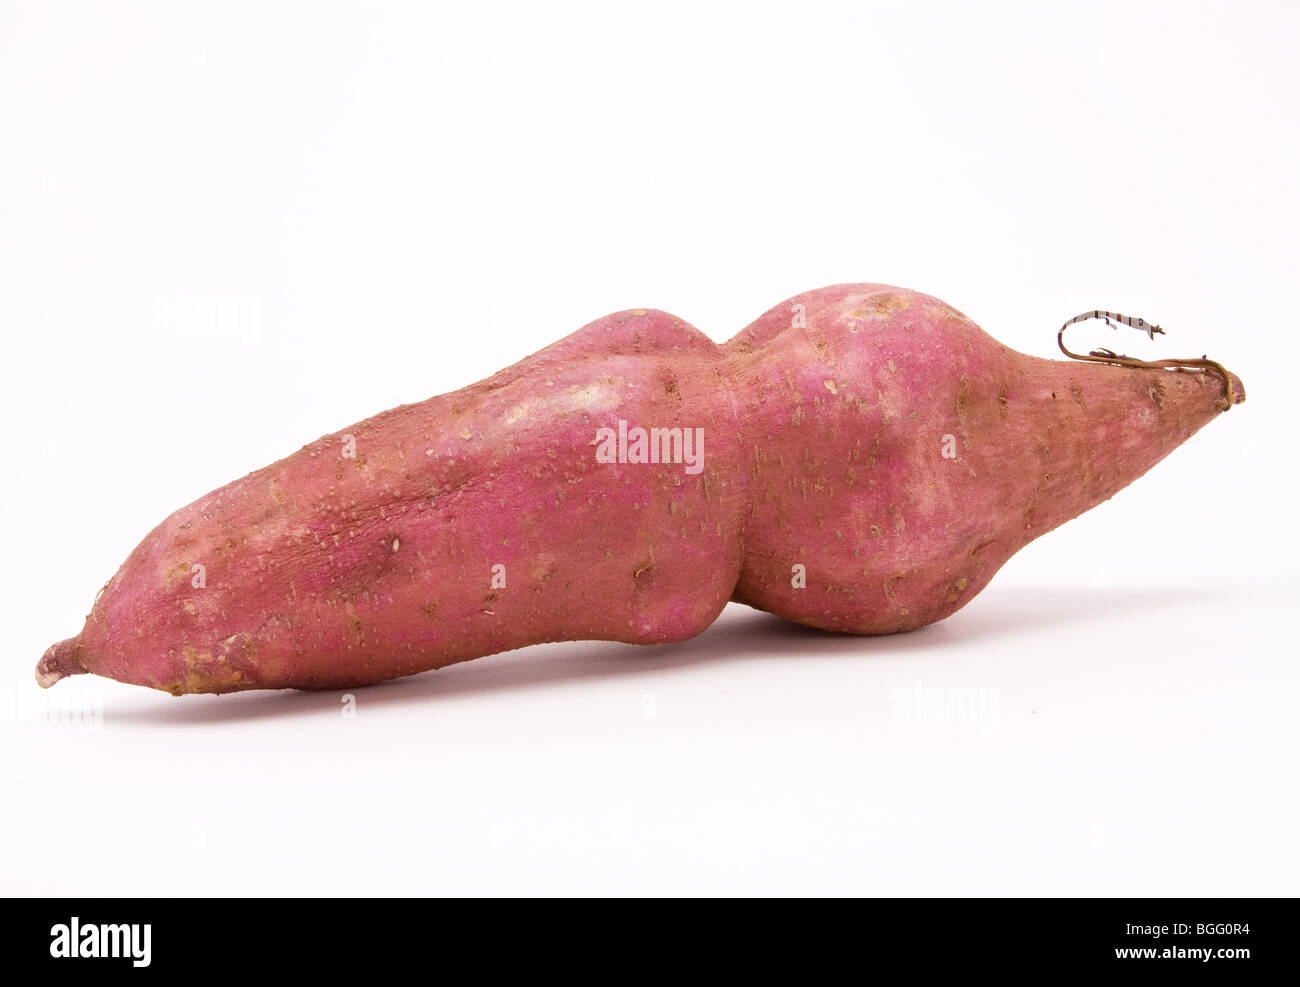 Sweet potato against white background from low perspective. Stock Photo